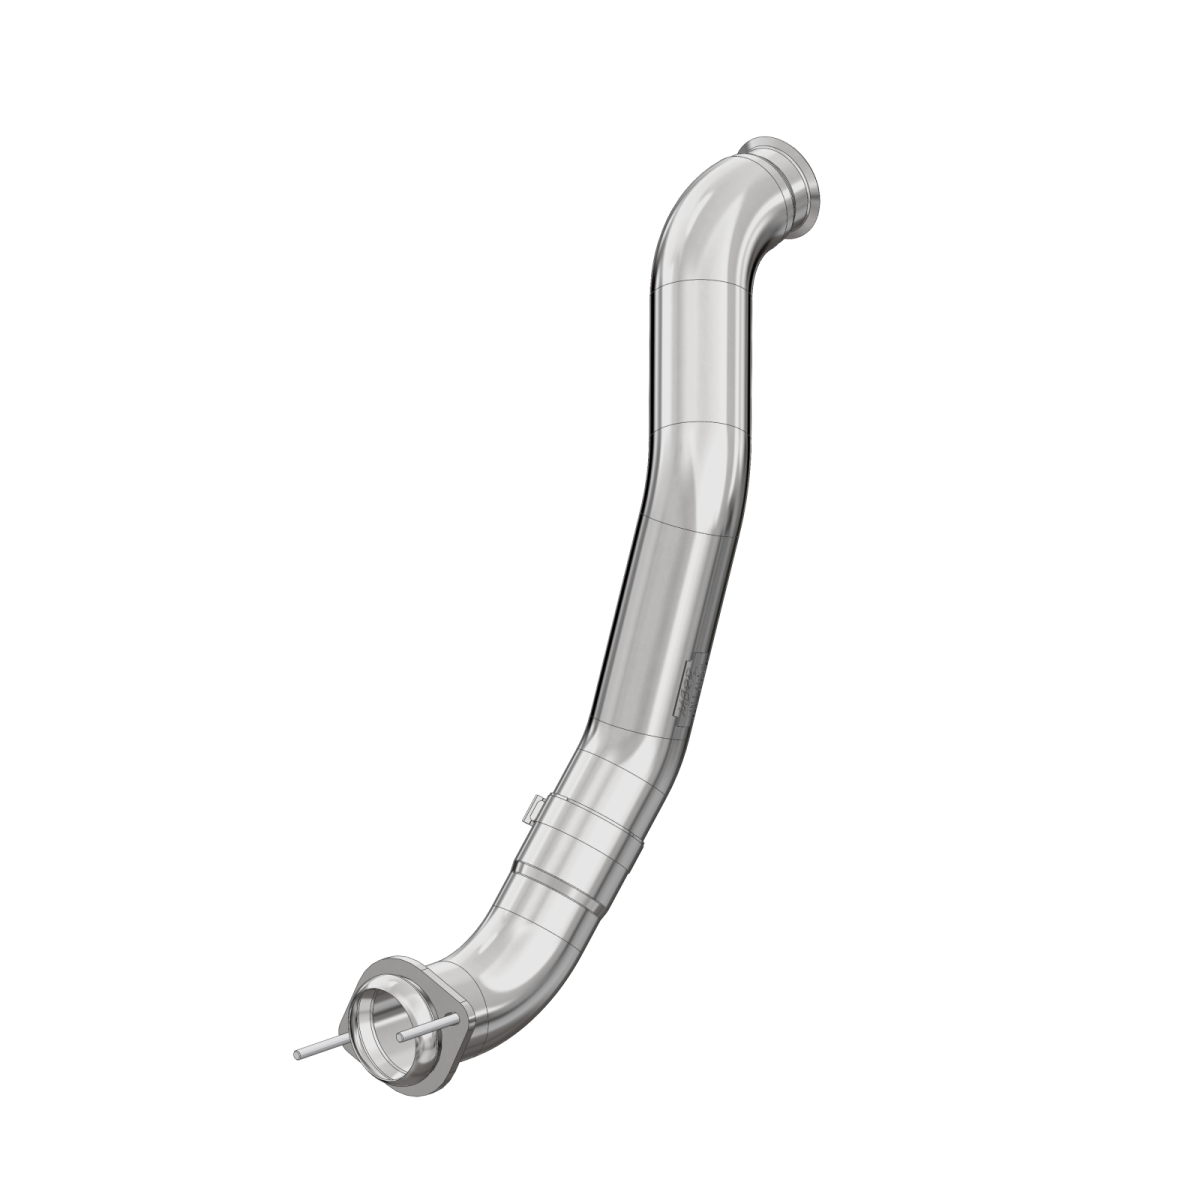 MBRP - MBRP Turbo Down Pipe For 08-10 Ford F250/350/450 6.4L Powerstroke Aluminized Steel EO Num. D-763-1 FALCA455